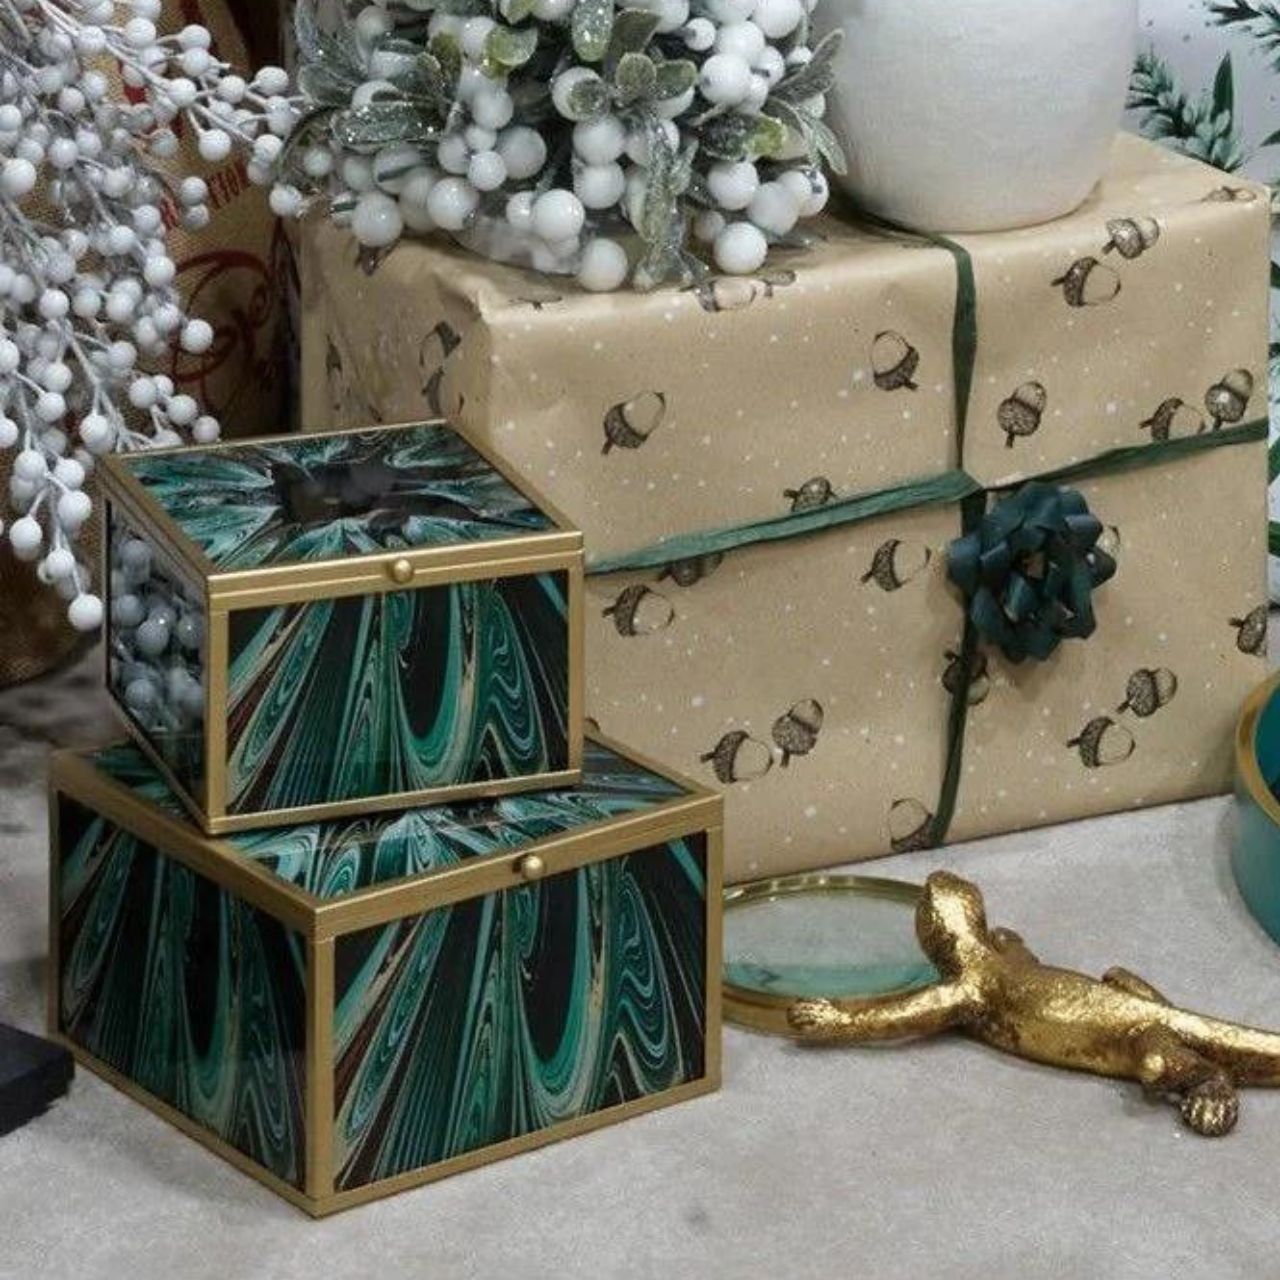 Mindy Brownes Accessory Box Set of 2 Green Envy  Swirls of gold, greens and amber finished with gold edging. The perfect styling accessory for any area in your home.